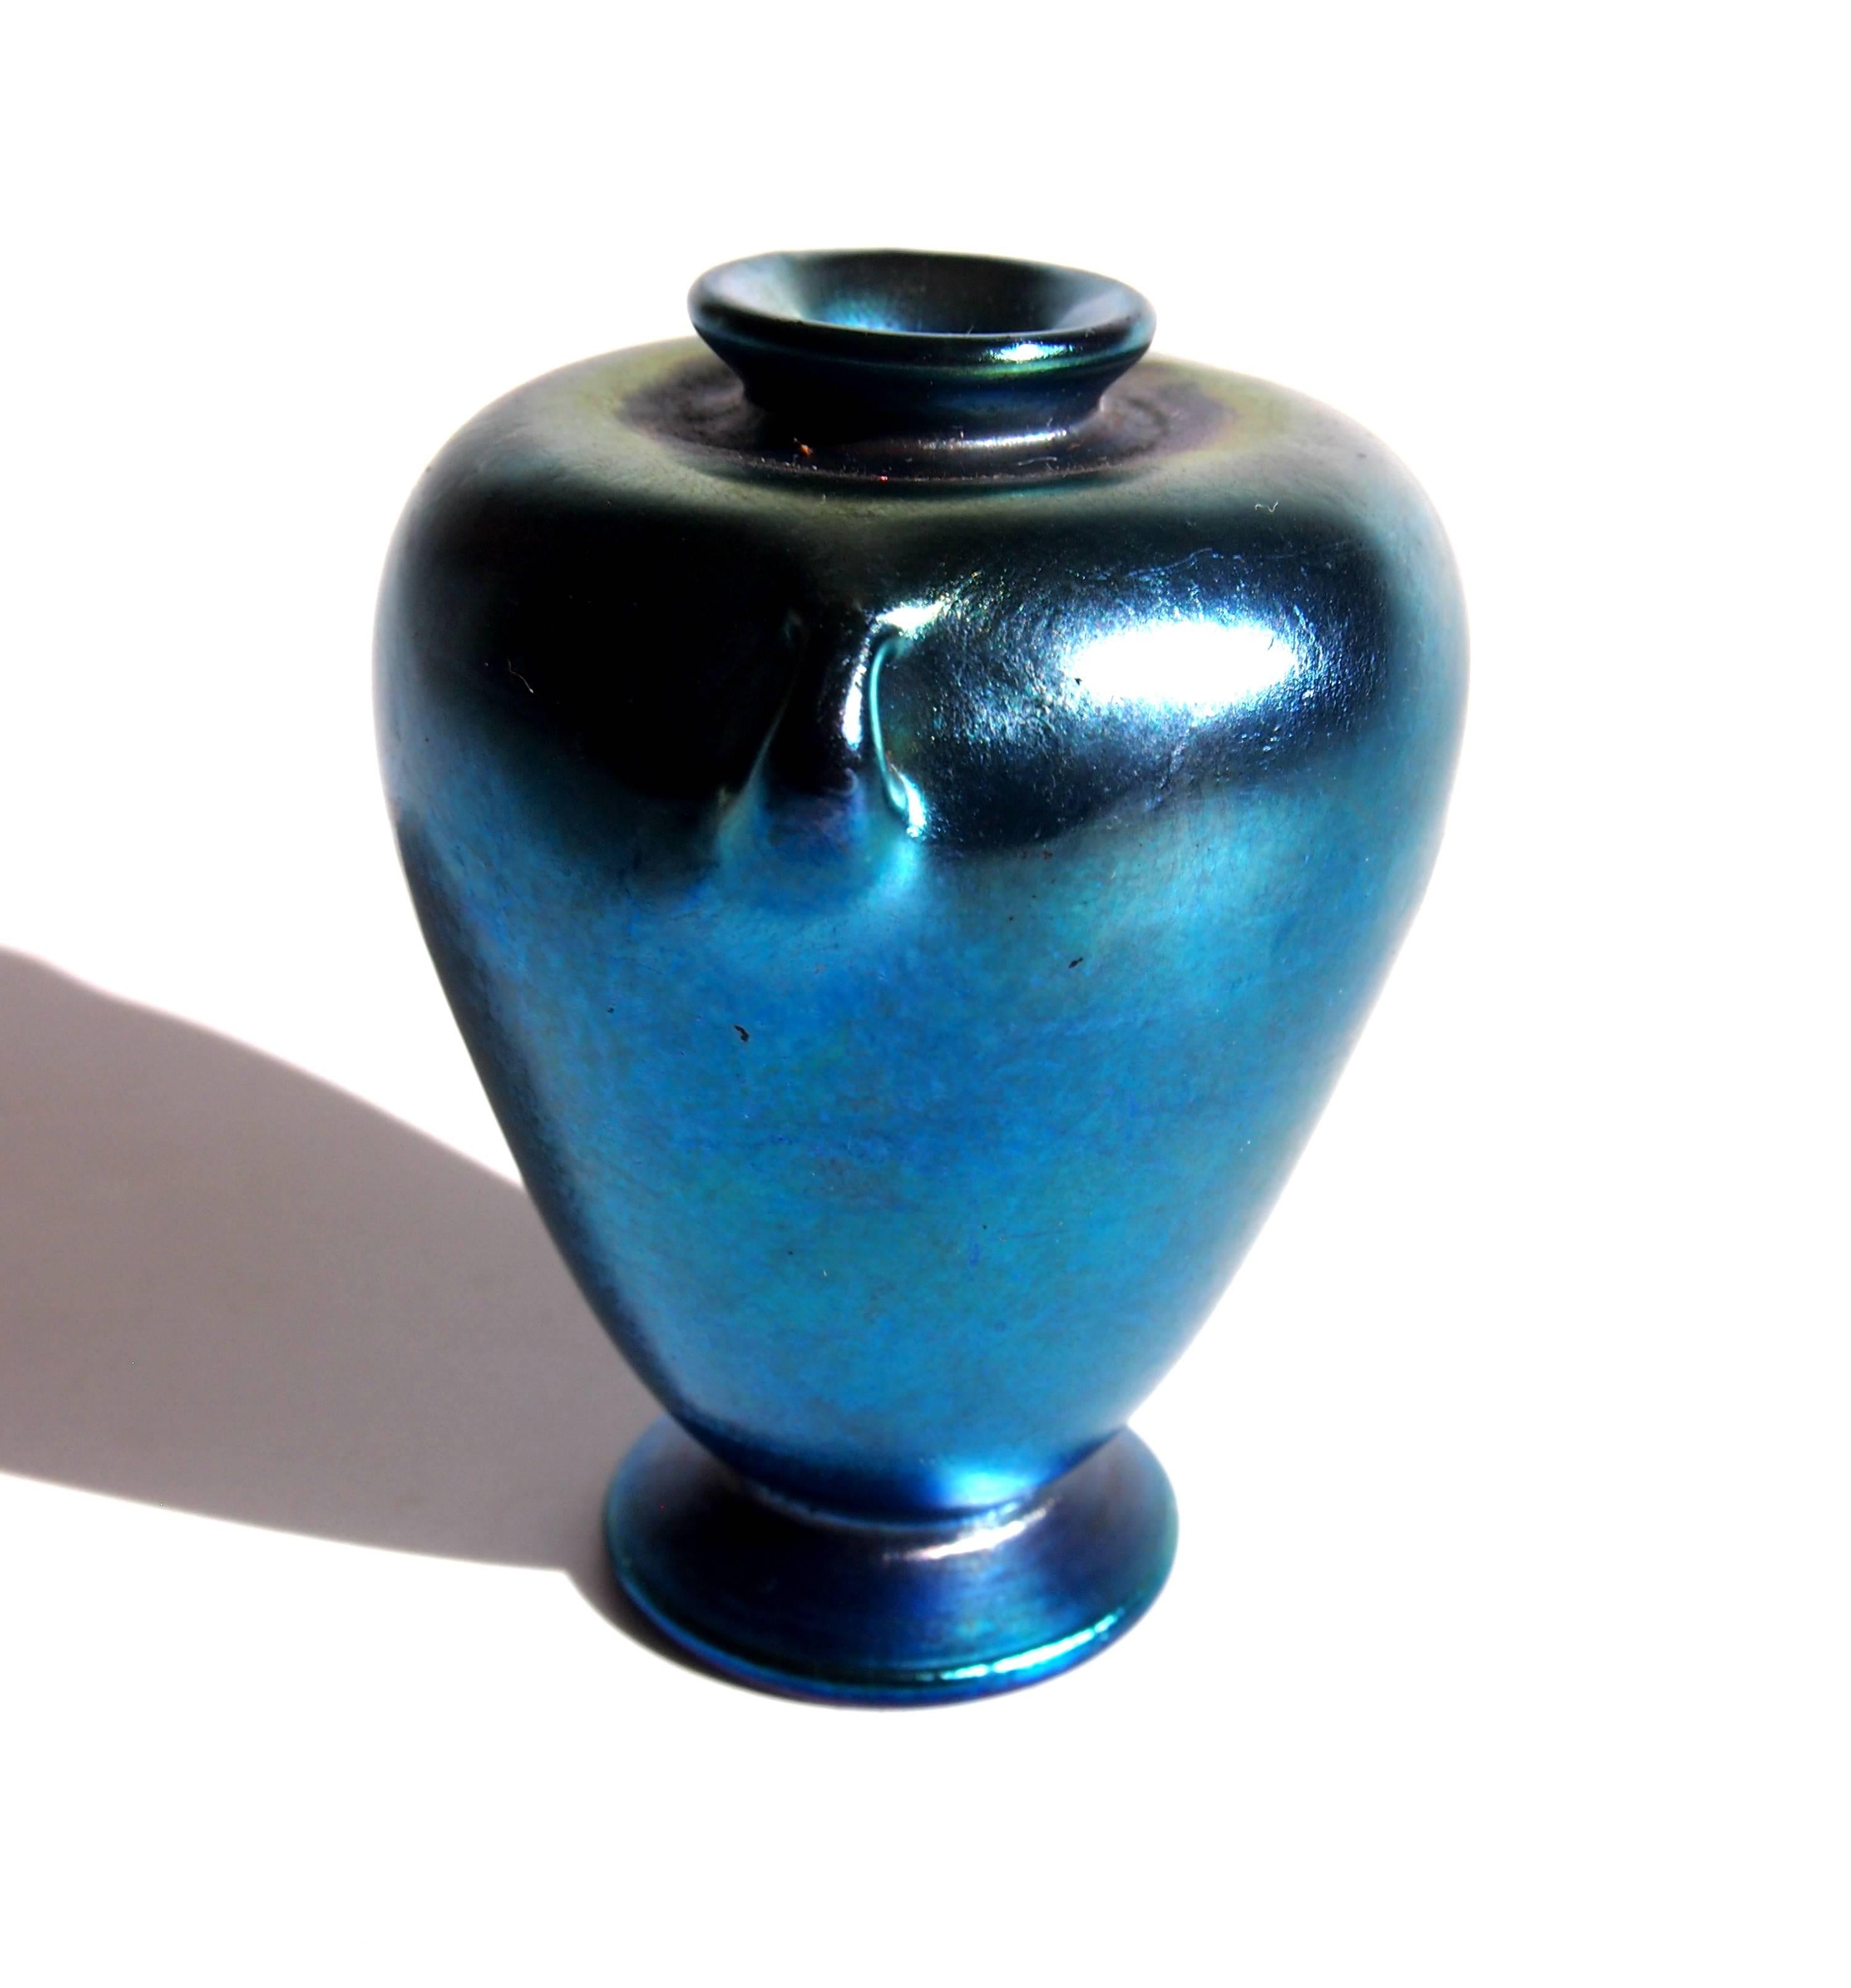 L C Tiffany Art Nouveau Blue Miniature Footed Favrile Glass Urn/Vase In Good Condition For Sale In London, GB